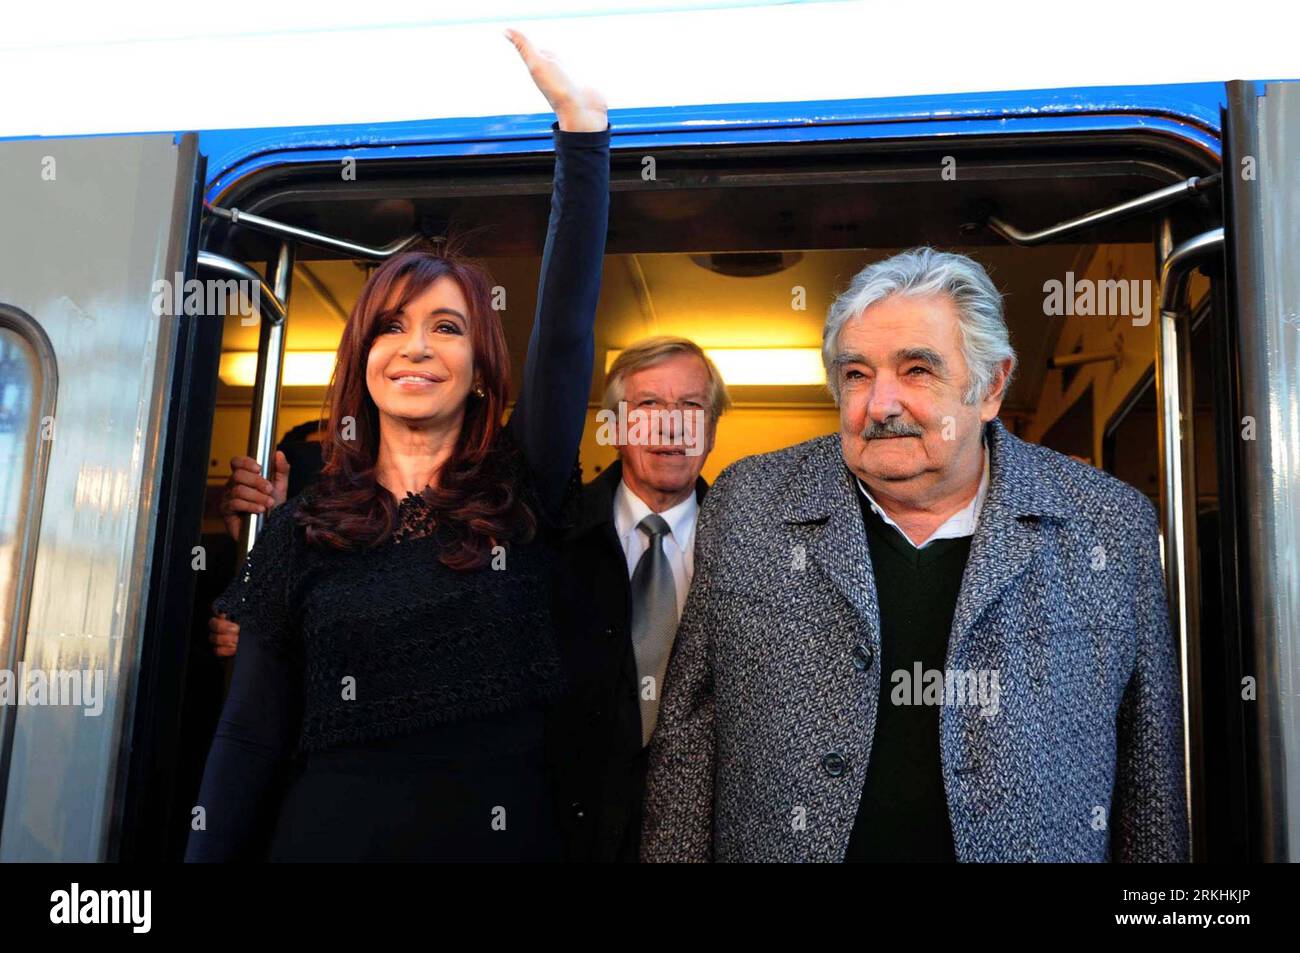 Bildnummer: 55848499  Datum: 29.08.2011  Copyright: imago/Xinhua (110830) -- SALTO, Aug, 30, 2011 (Xinhua) -- Argentina s President Cristina Fernandez de Kirchner (L) and Uruguay s President Jose Mujica board a new train that will join their countries by rail for the first time, in Concordia, Argentina, as they leave for Salto, Uruguay, August 29, 2011. The new train line joins the two cities across the Uruguay River, and will eventually unite the existing rail networks of both countries, according to the Argentine government. (Xinhua/Nicolas Celaya) (yc) ARGENTINA-CONCORDIA-URUGUAY-RAILWAY PU Stock Photo